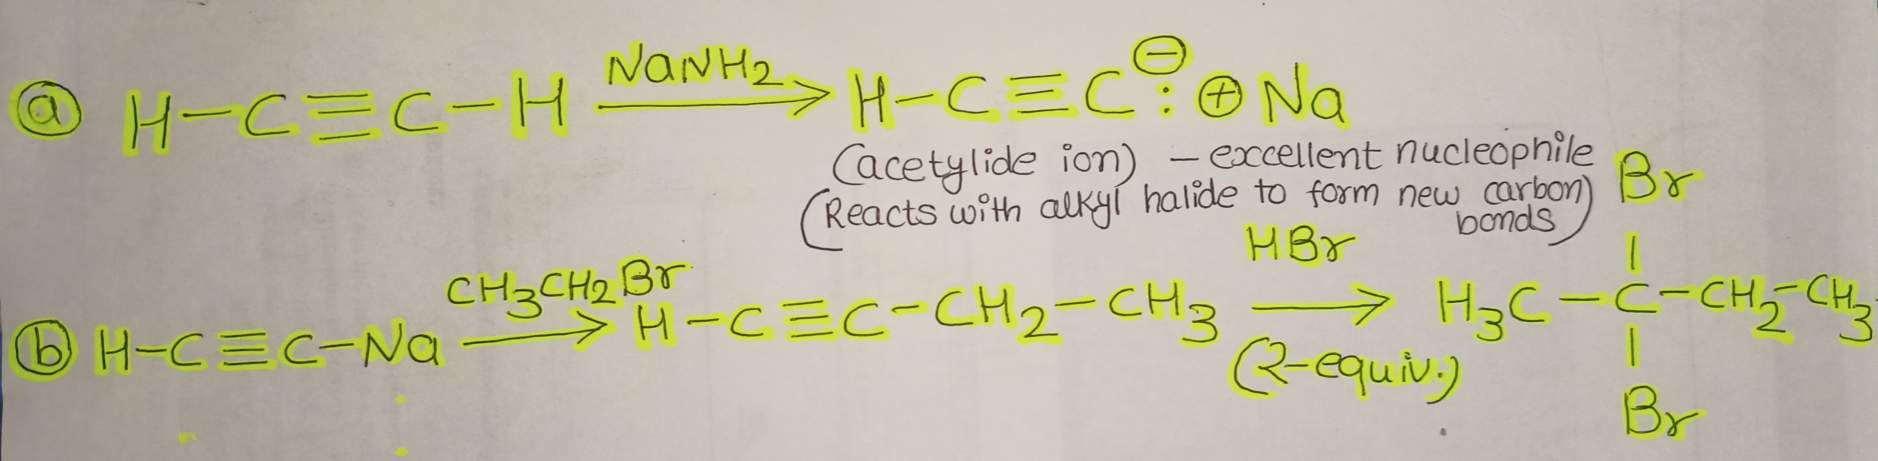 in each reaction box, place the best reagent and conditions from the list below. alkyne